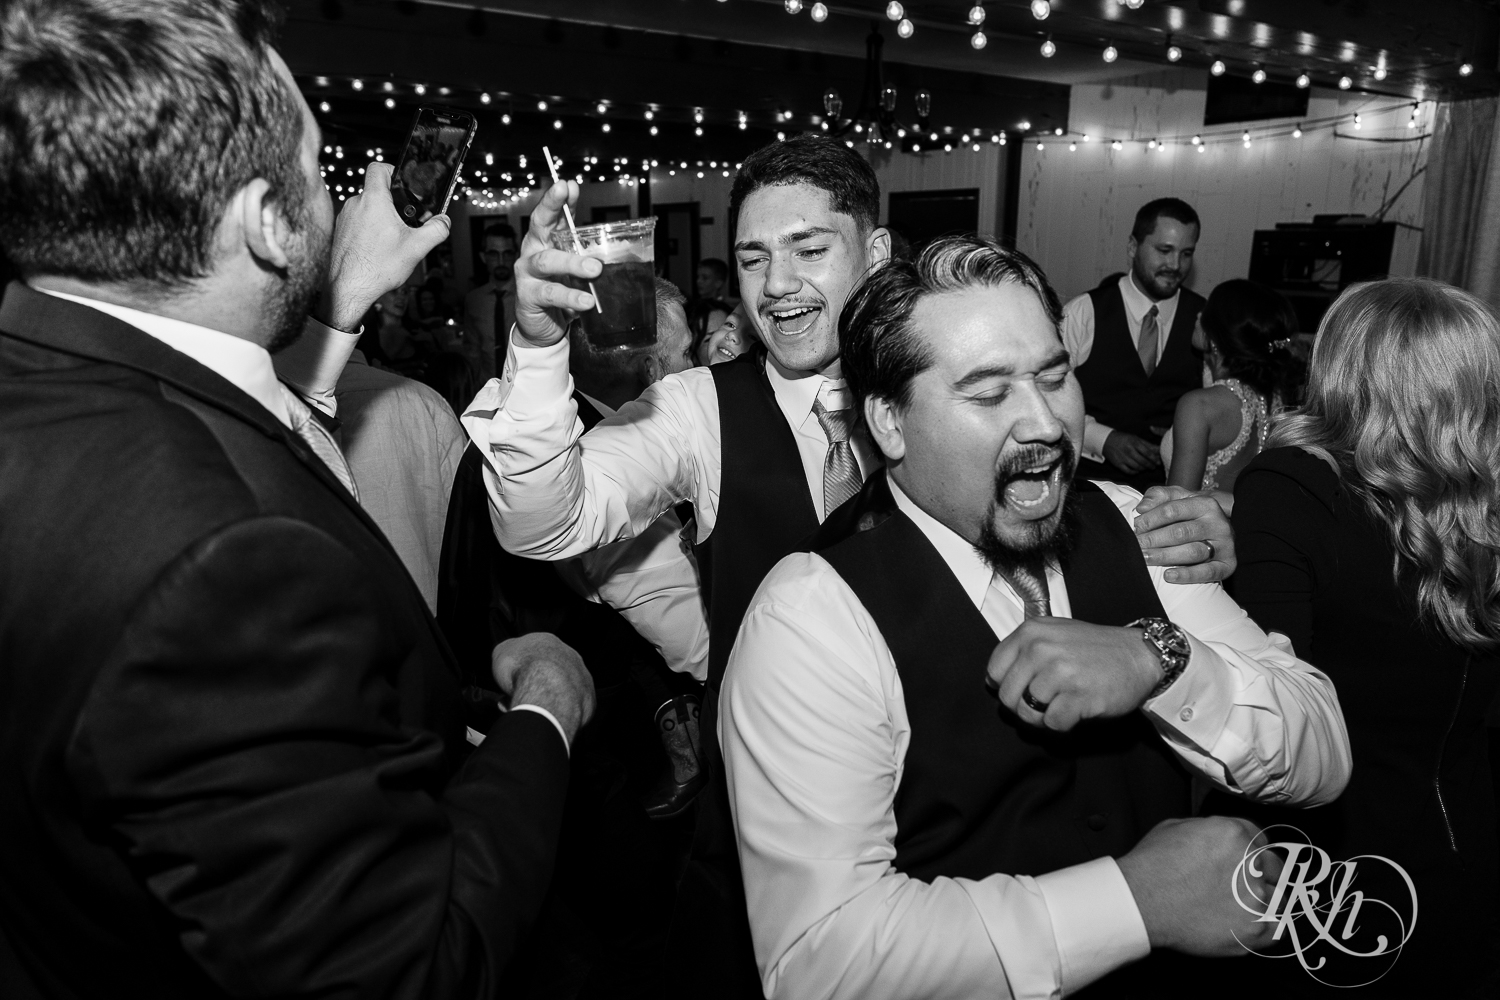 Guests dance during wedding reception at The Chart House in Lakeville, Minnesota.